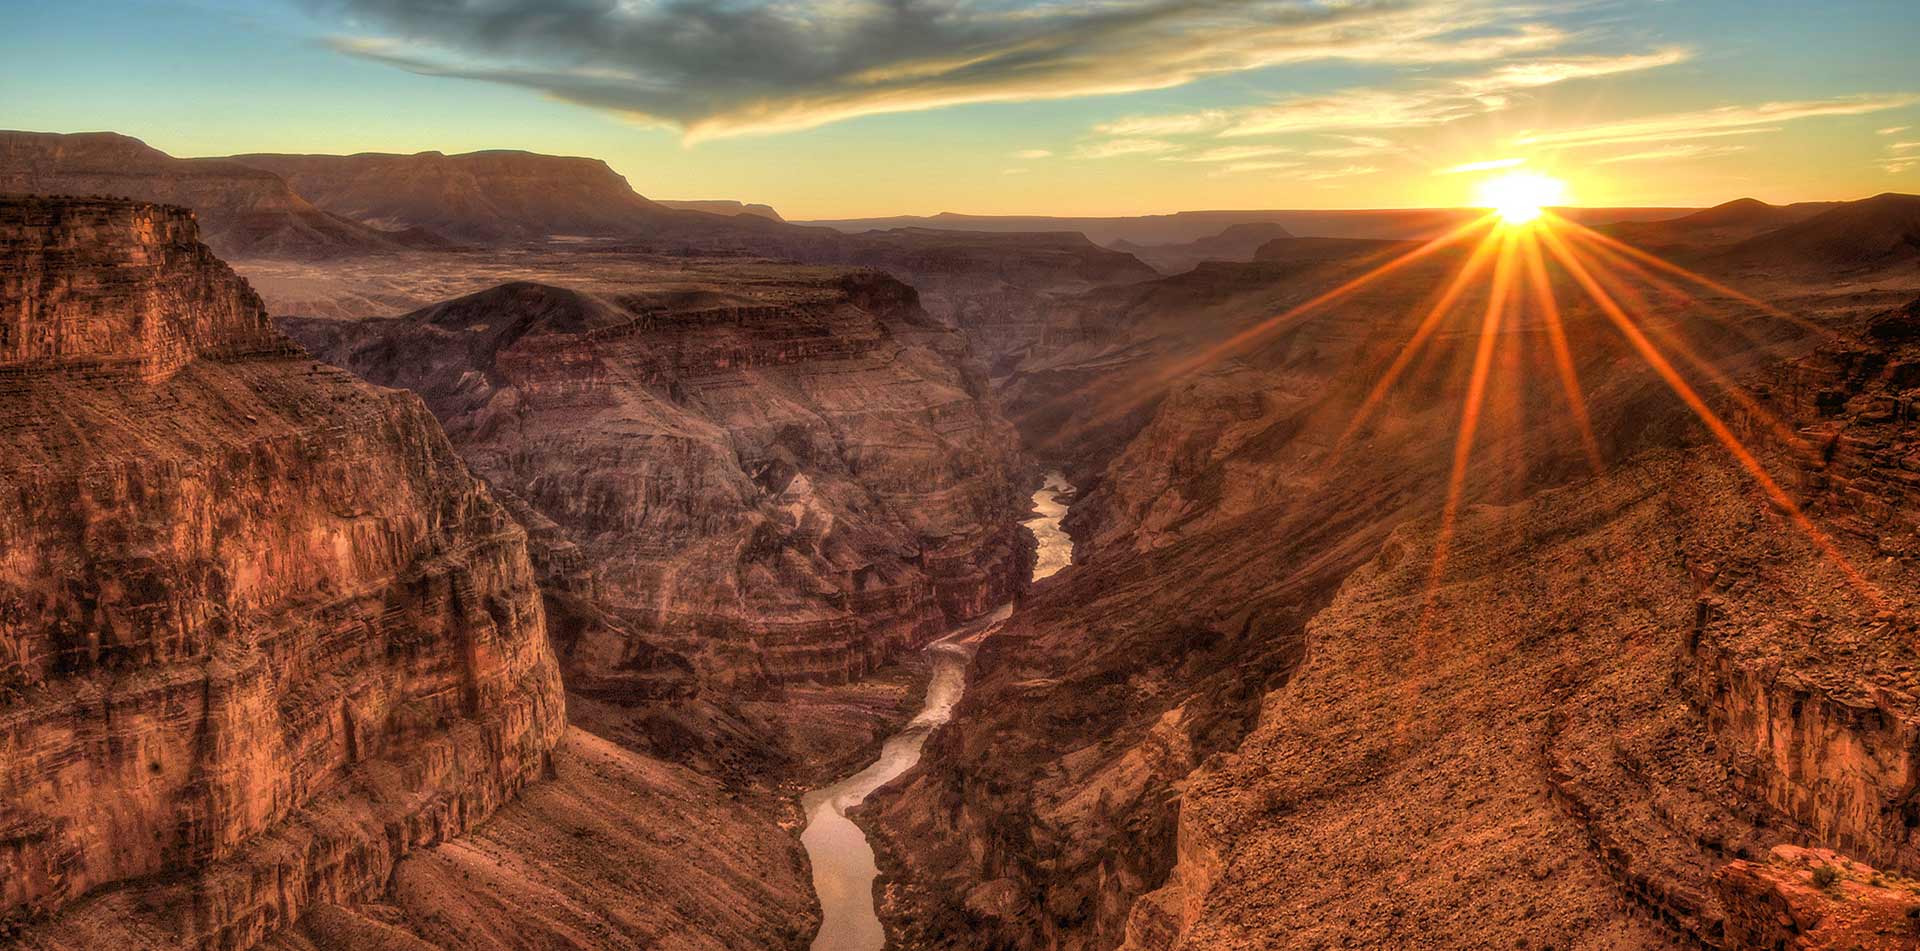 Stunning sunset at the Grand Canyon